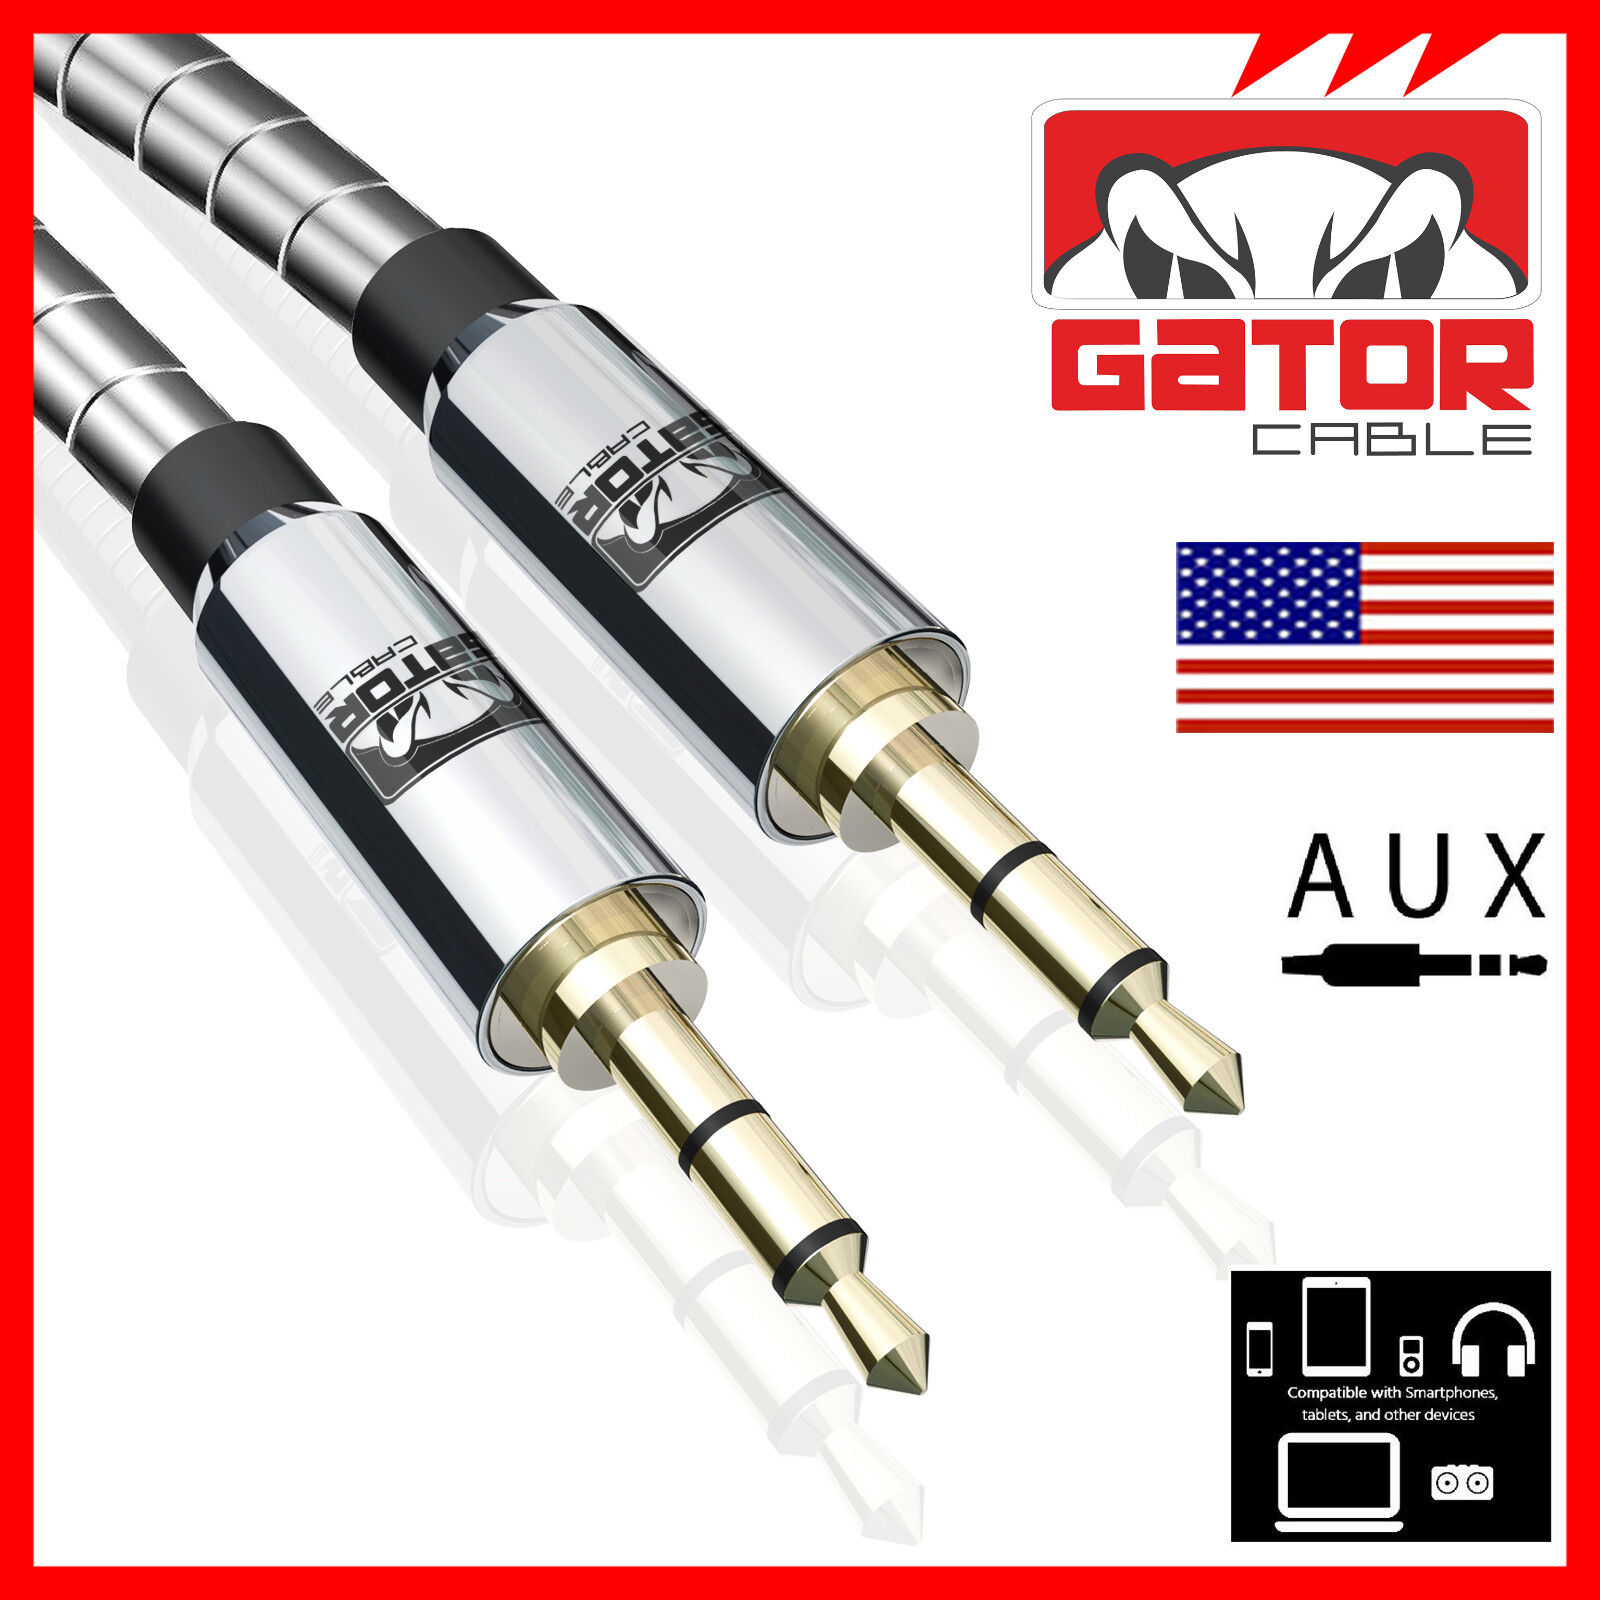 AUX 3.5mm Audio Cable Cord Male to Male For Phone iPhone Samsung LG Earphones Gator Cable AUX-3.5mm-Male-to-Male - фотография #7